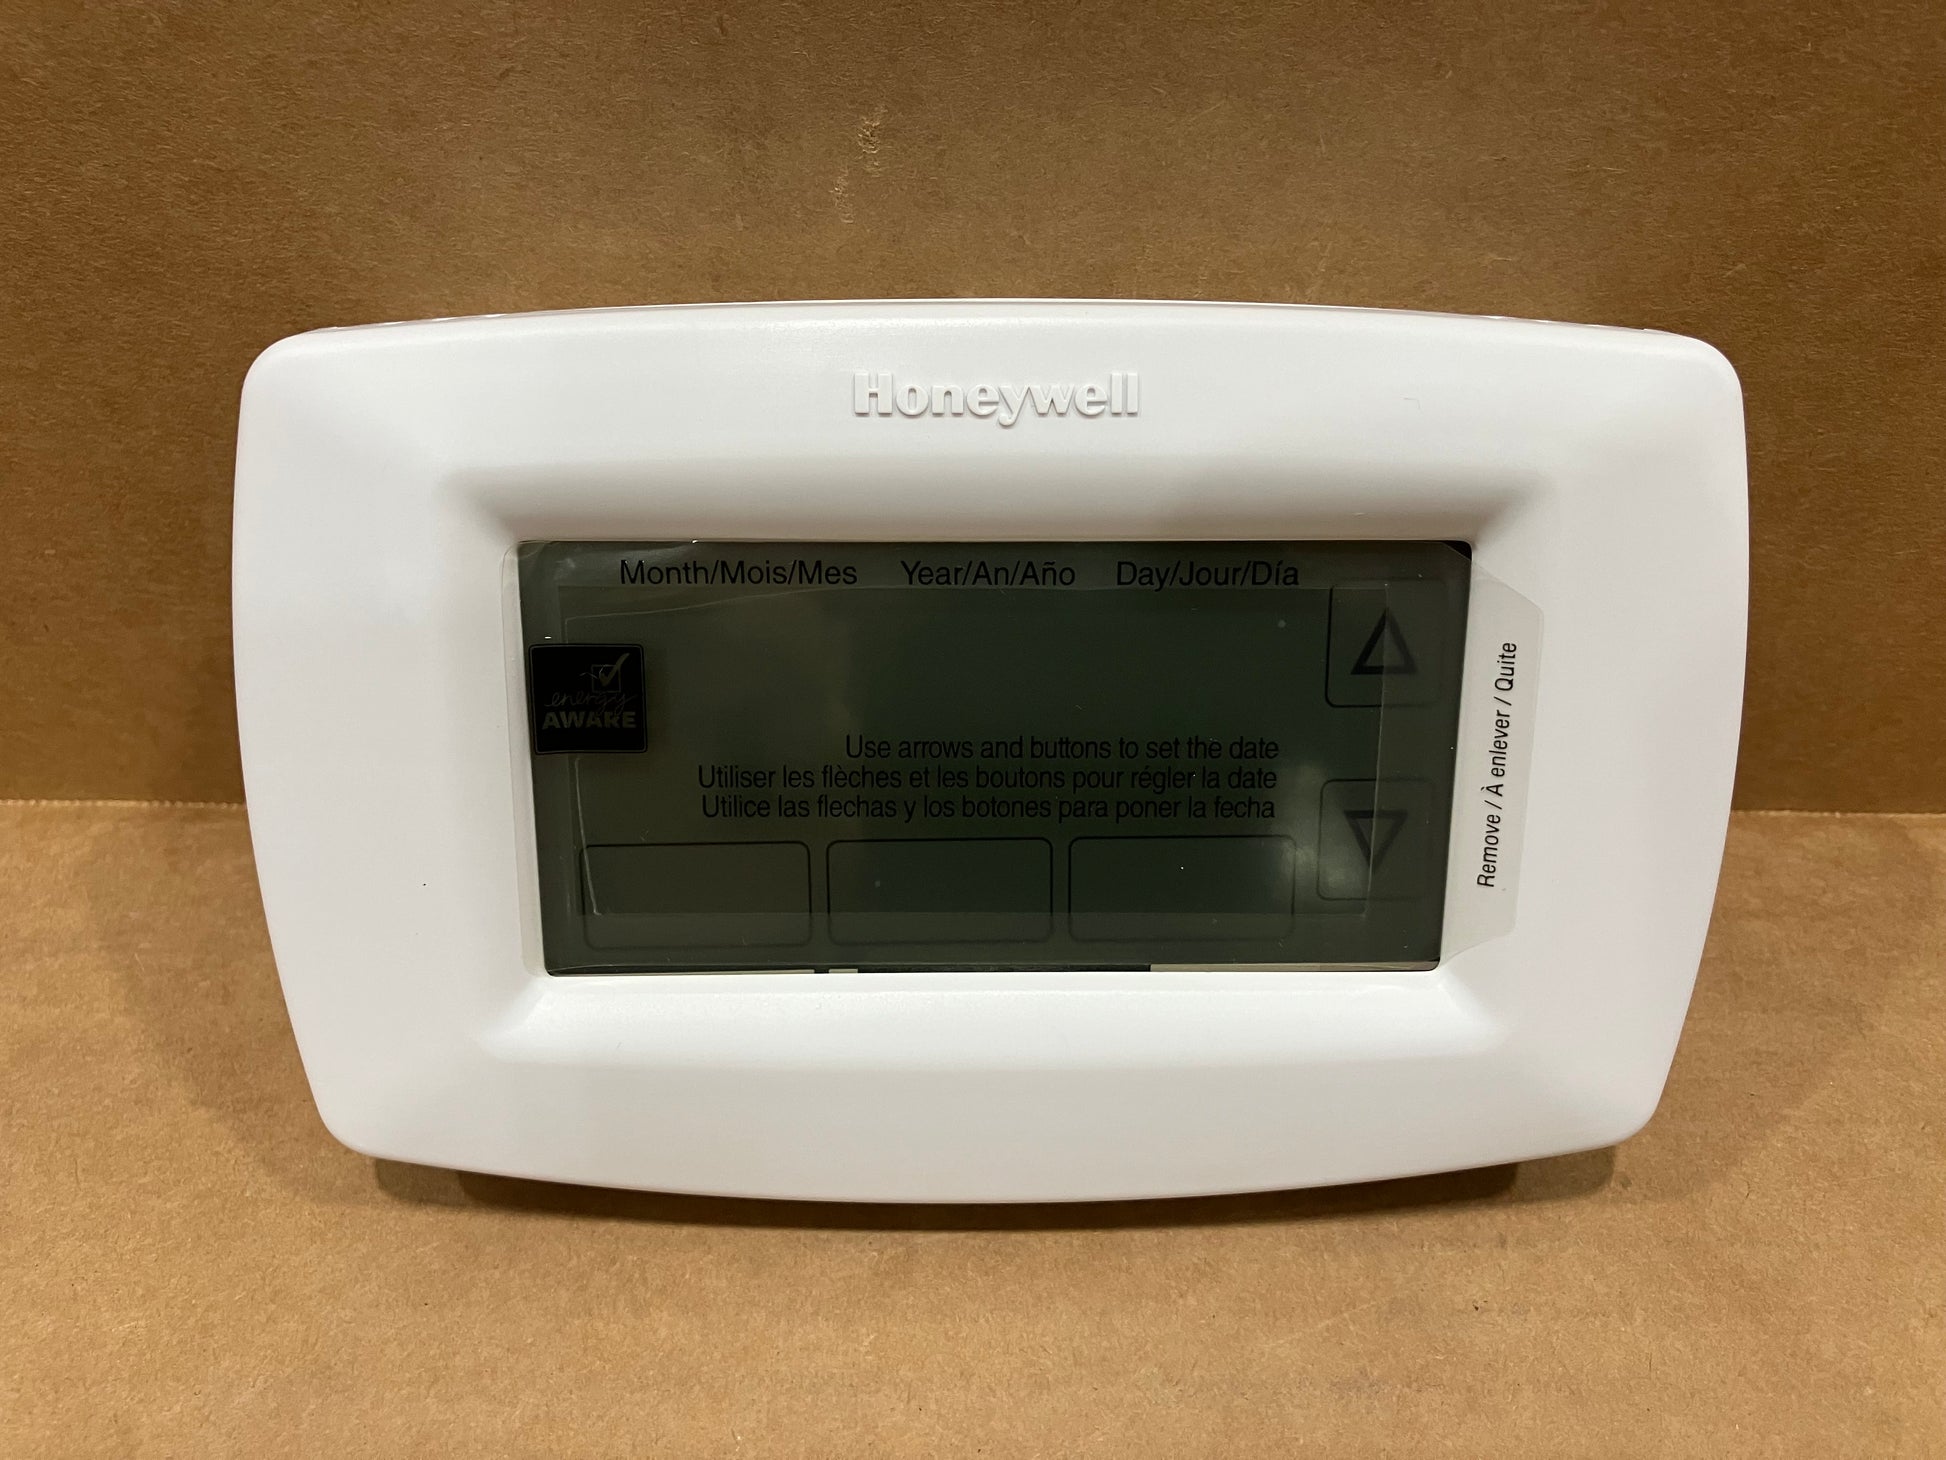 7-DAY TOUCHSCREEN PROGRAMMABLE THERMOSTAT 2 HEAT/2 COOL CONVENTIONAL/HEAT PUMP